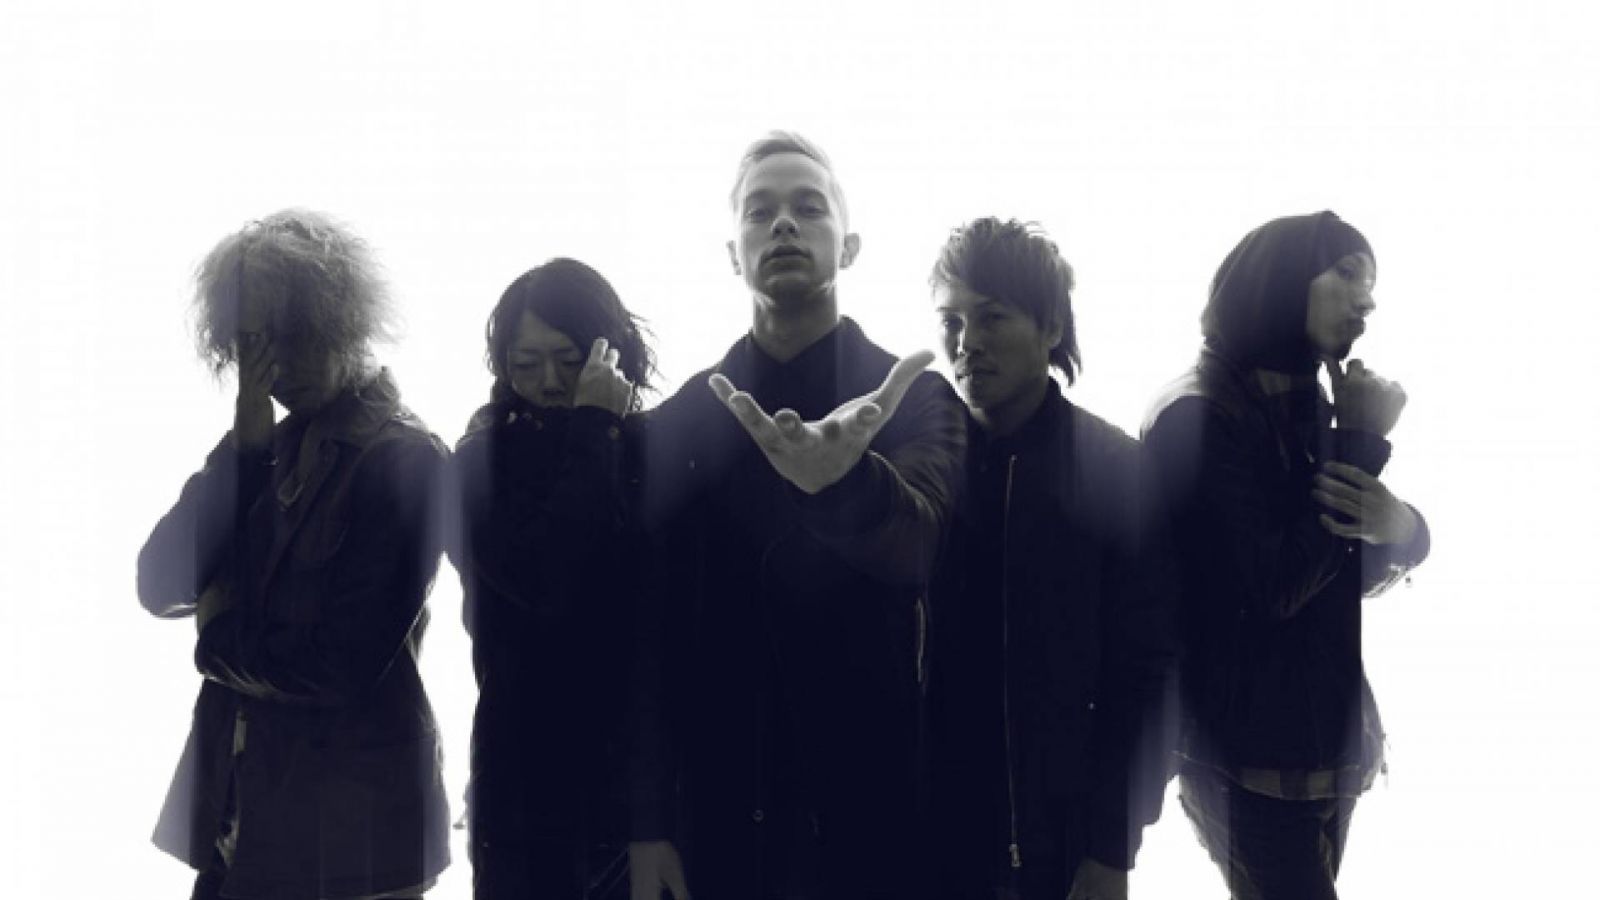 coldrain © GIL SOUNDWORKS, all rights reserved